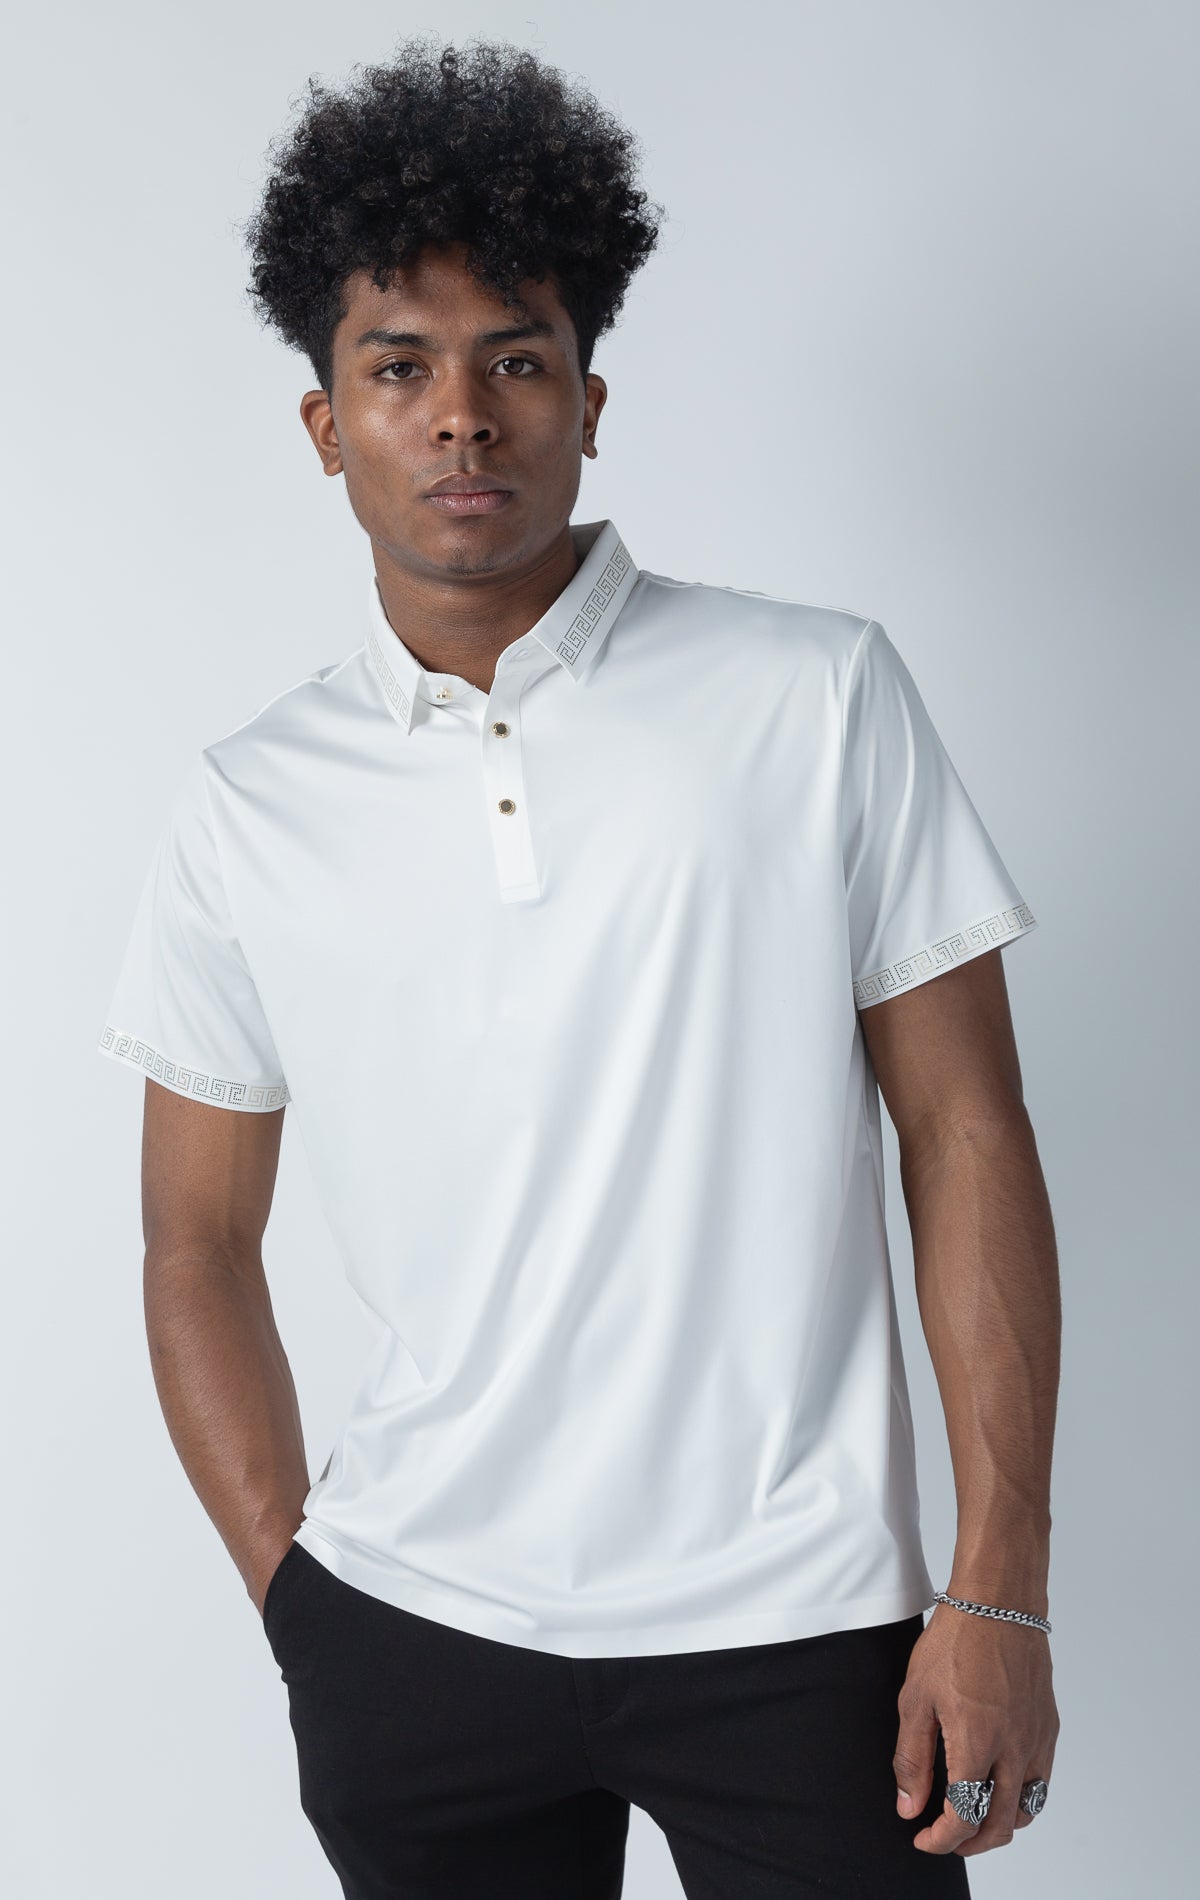 Greek key pattern luxury white polo shirts with the lines of rhinestone on the collar.